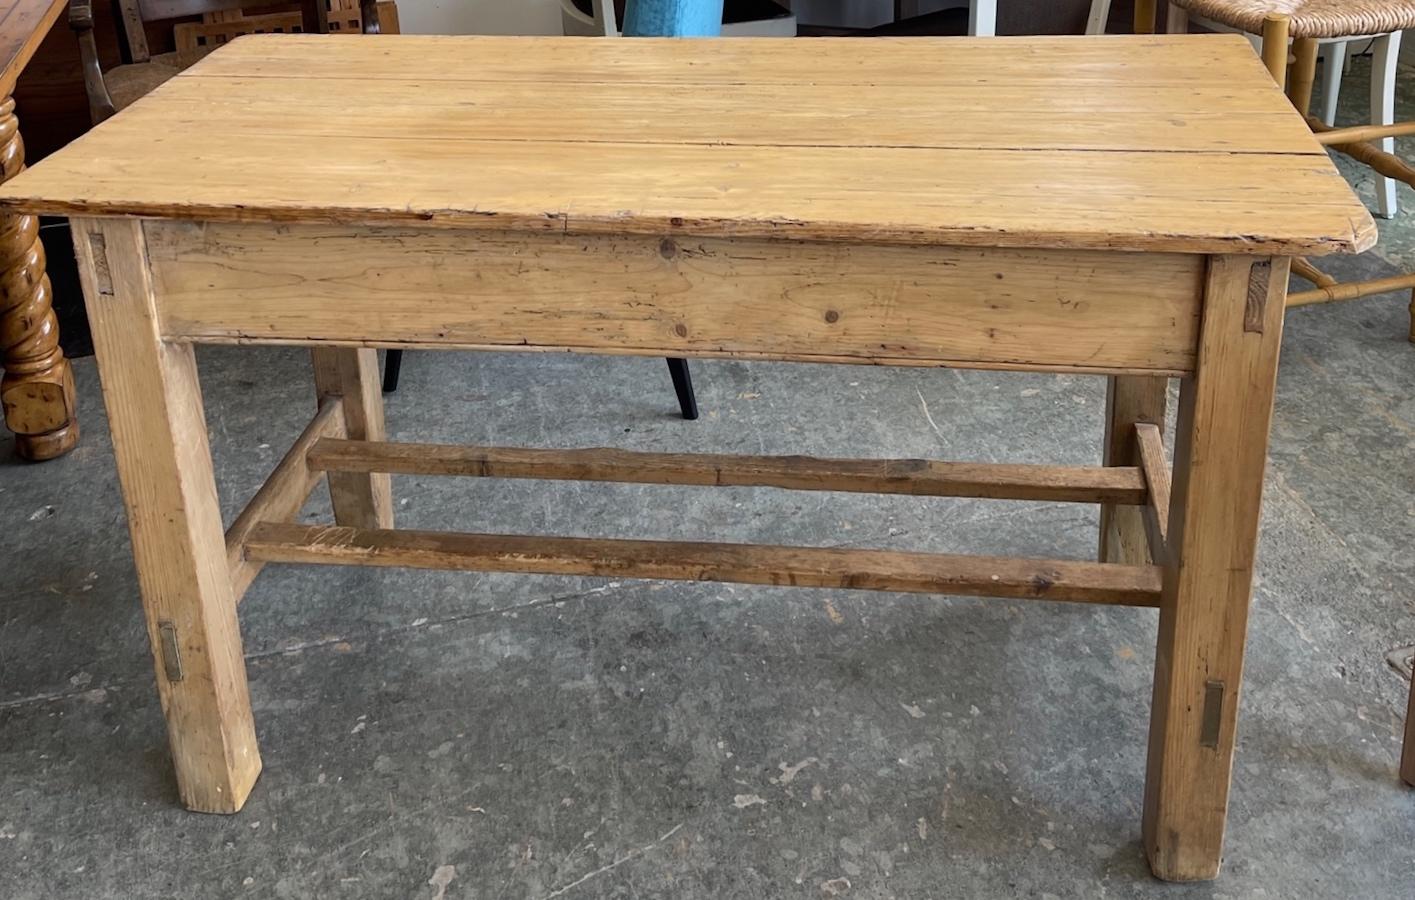 This is a good example of an 19th century Irish breakfast or small dining table. It is made of pine which was most popular for these types of tables using the method of tongue and groove method of assembly.. It has a center drawer usually used for